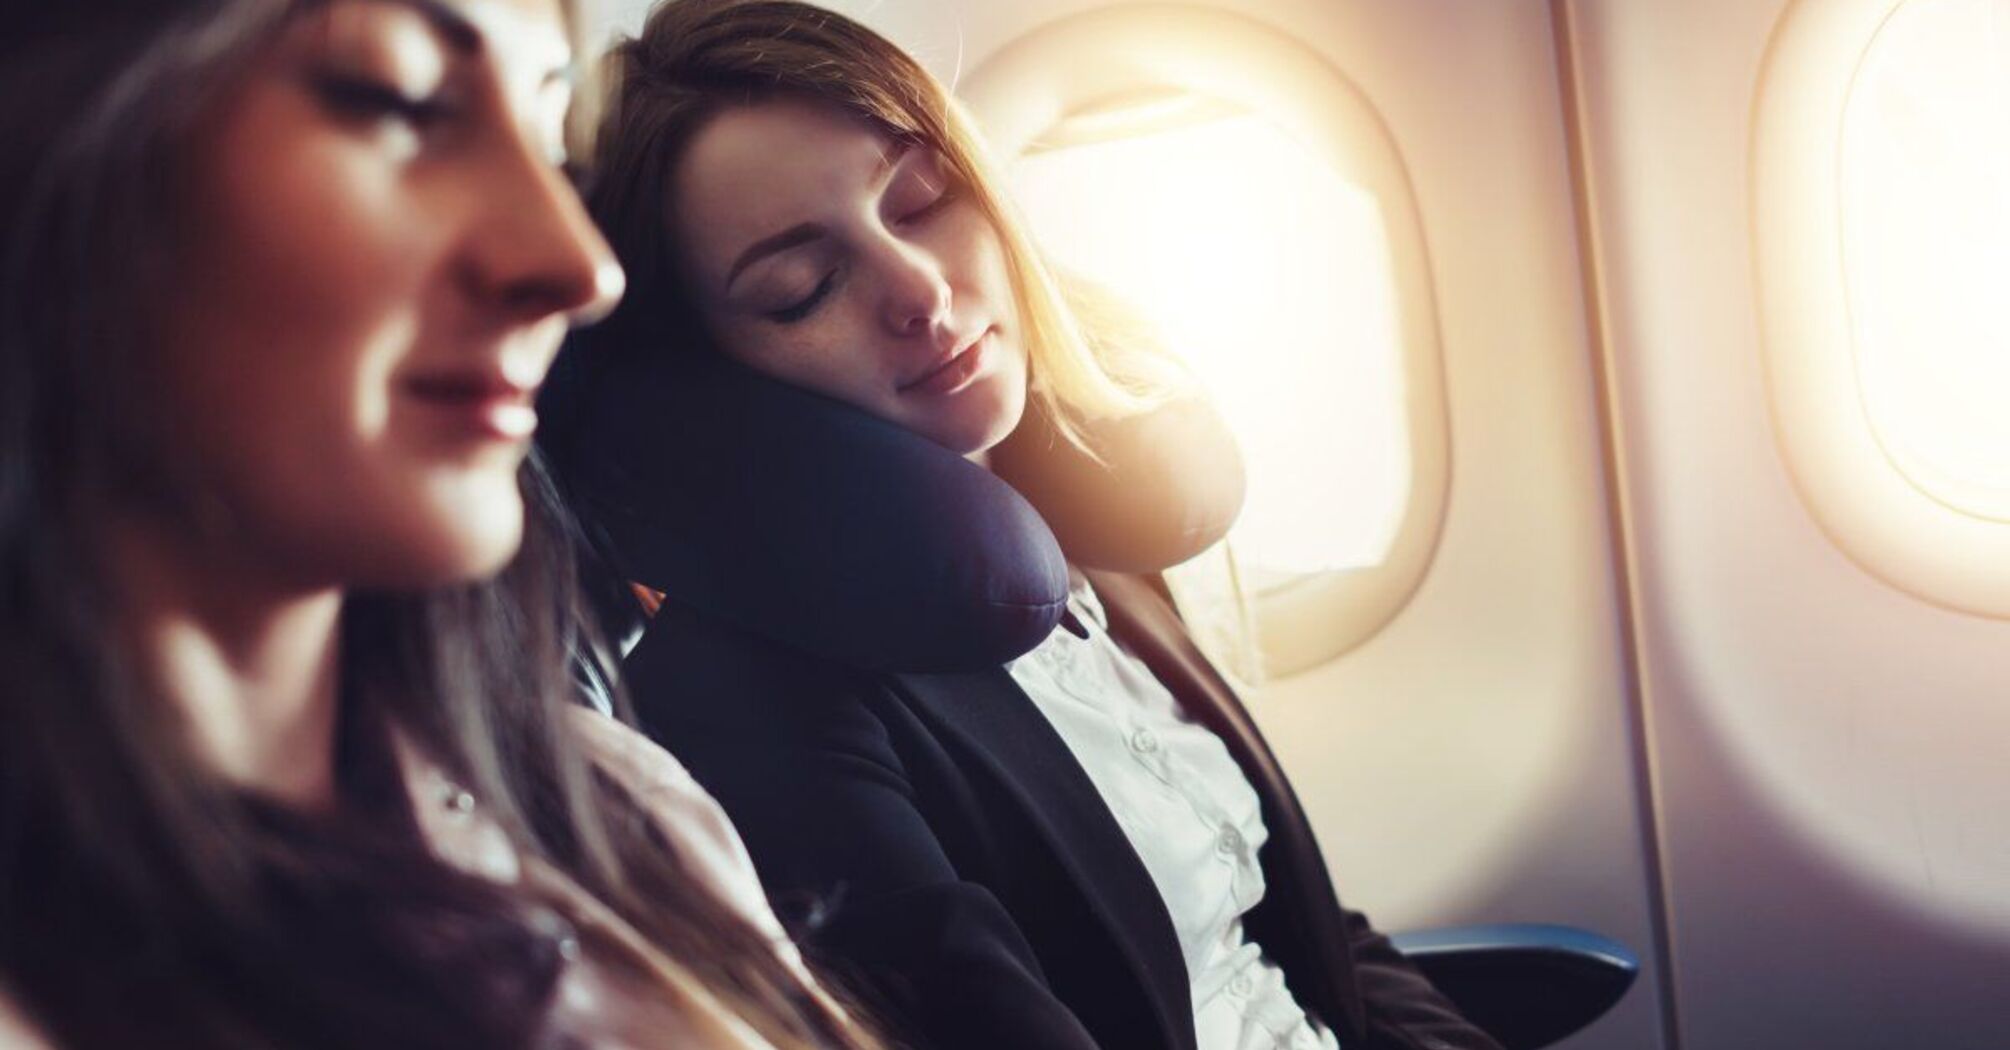 A passenger who was "stuck" in the middle seat on an airplane showed an unusual life hack